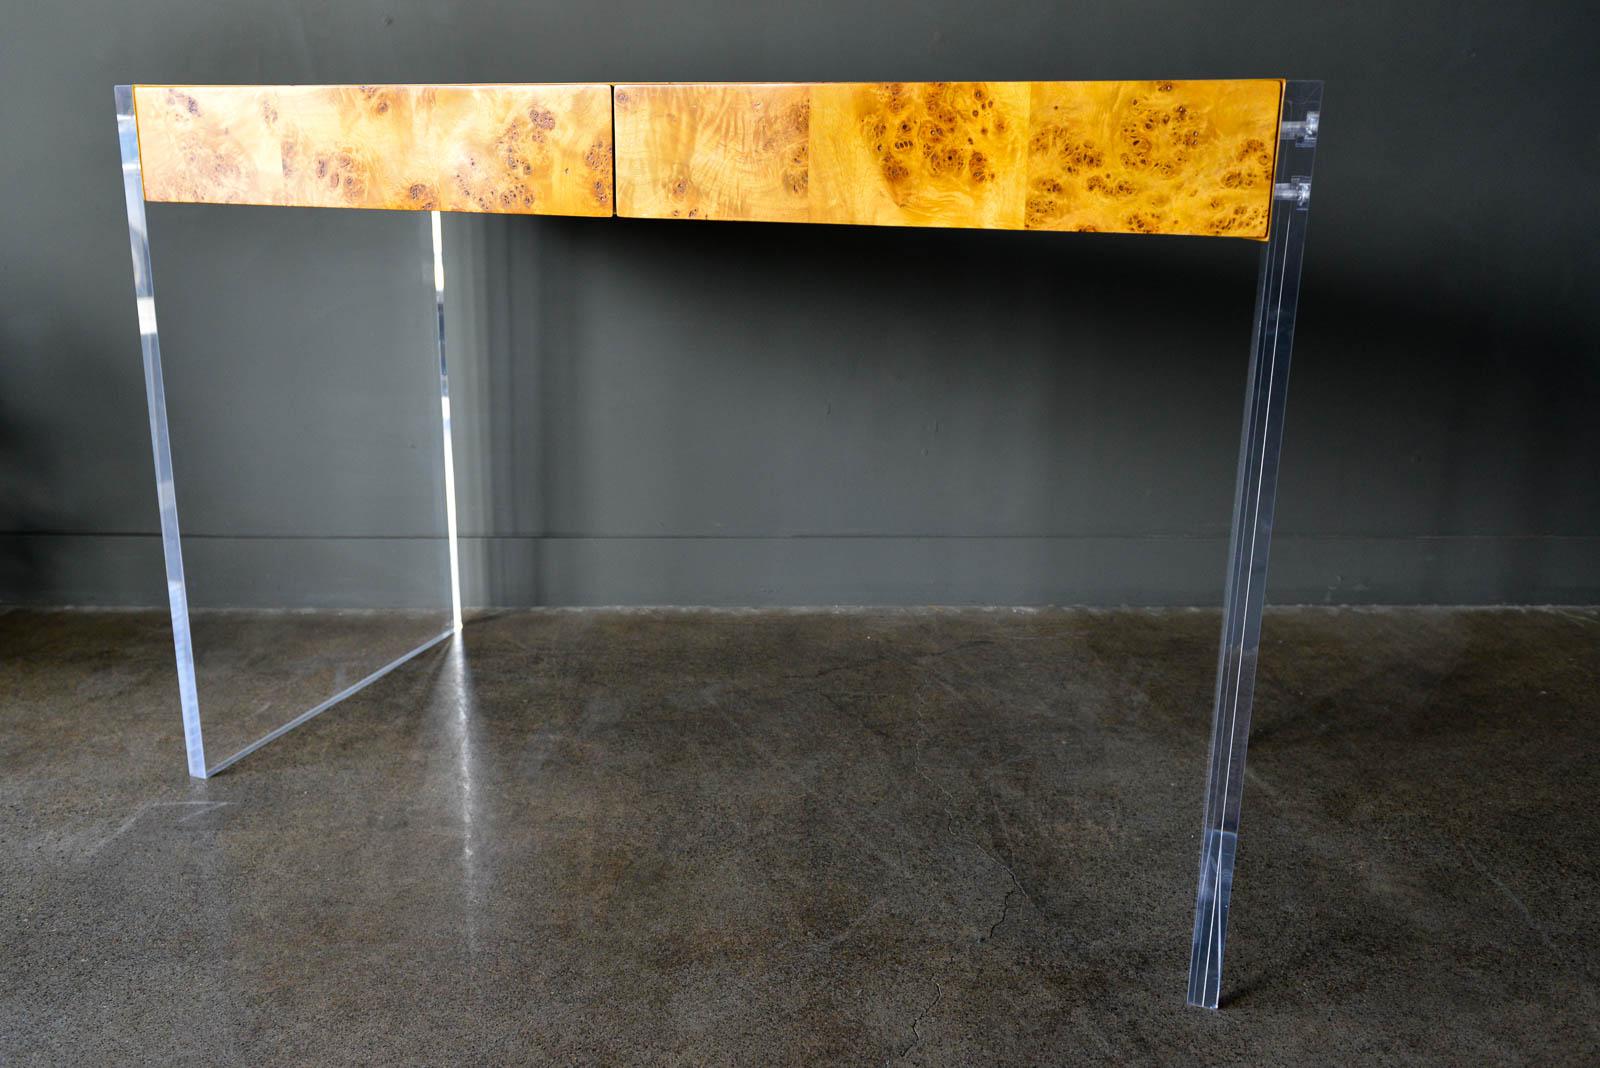 Jonathan Adler Bond burl wood and Lucite desk. Beautiful warm, burl wood and crisp Lucite desk with two soft close sliding flush drawers. Clean lines and classic design. 

We have two of these desks available. Excellent original